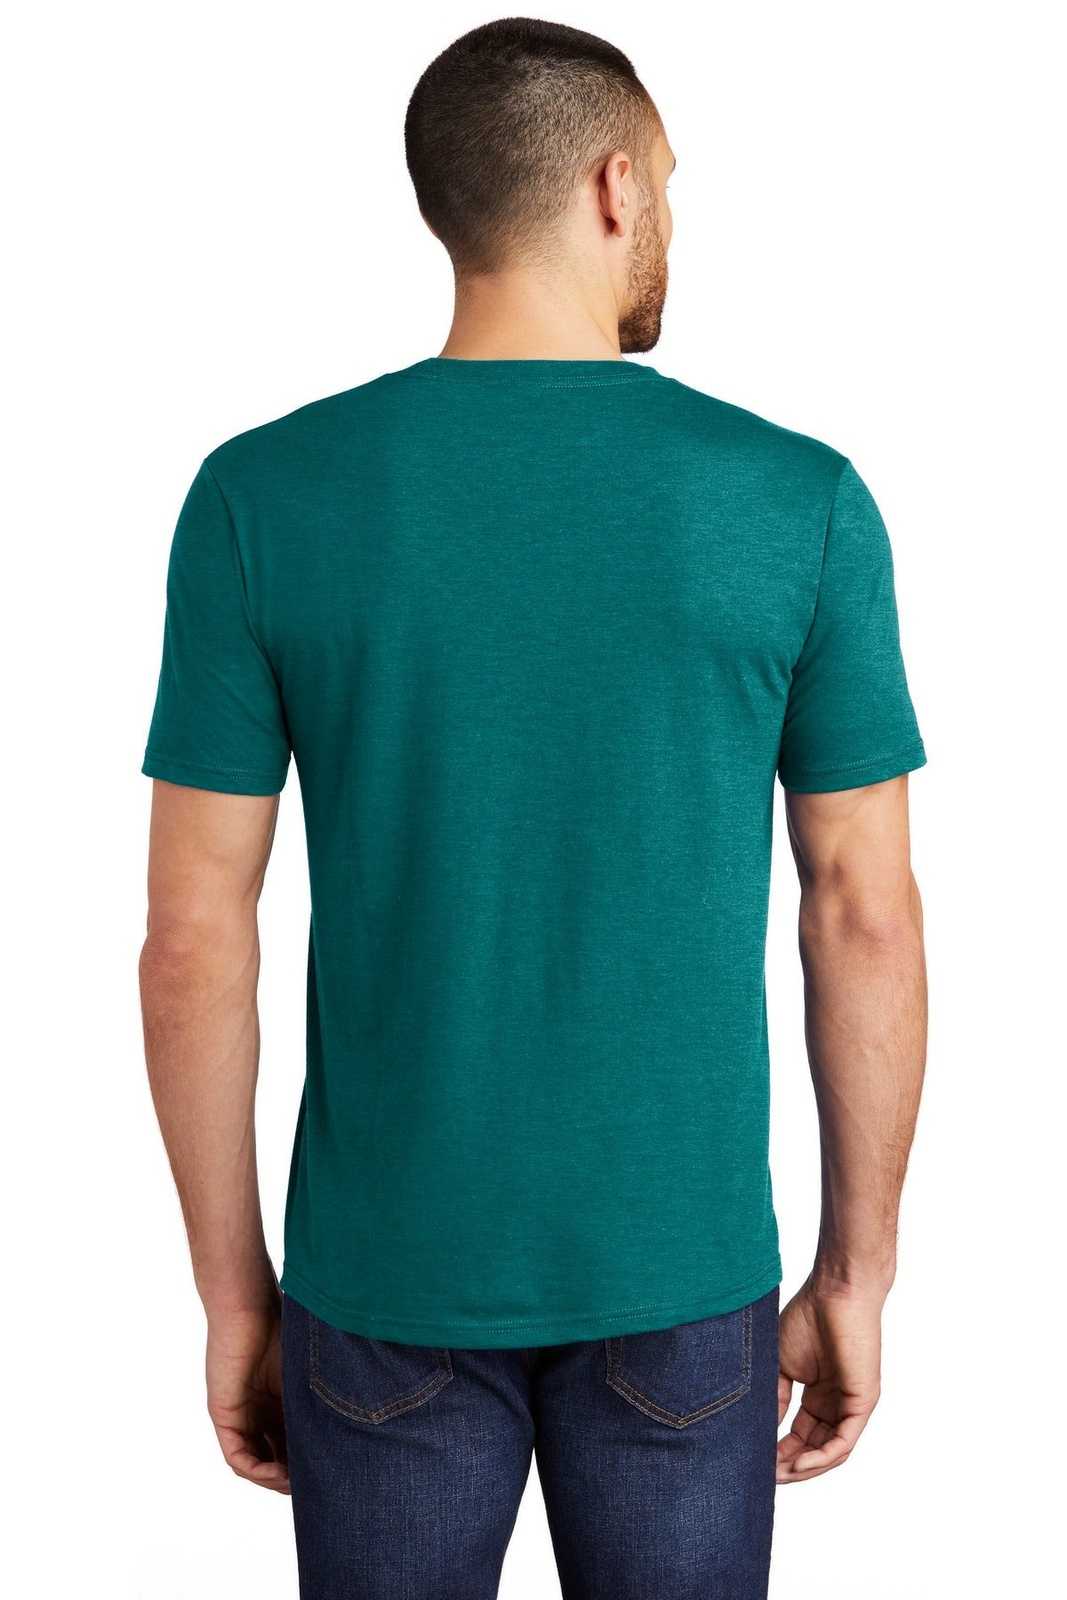 District DM130 Perfect Tri Tee - Heathered Teal - HIT a Double - 2